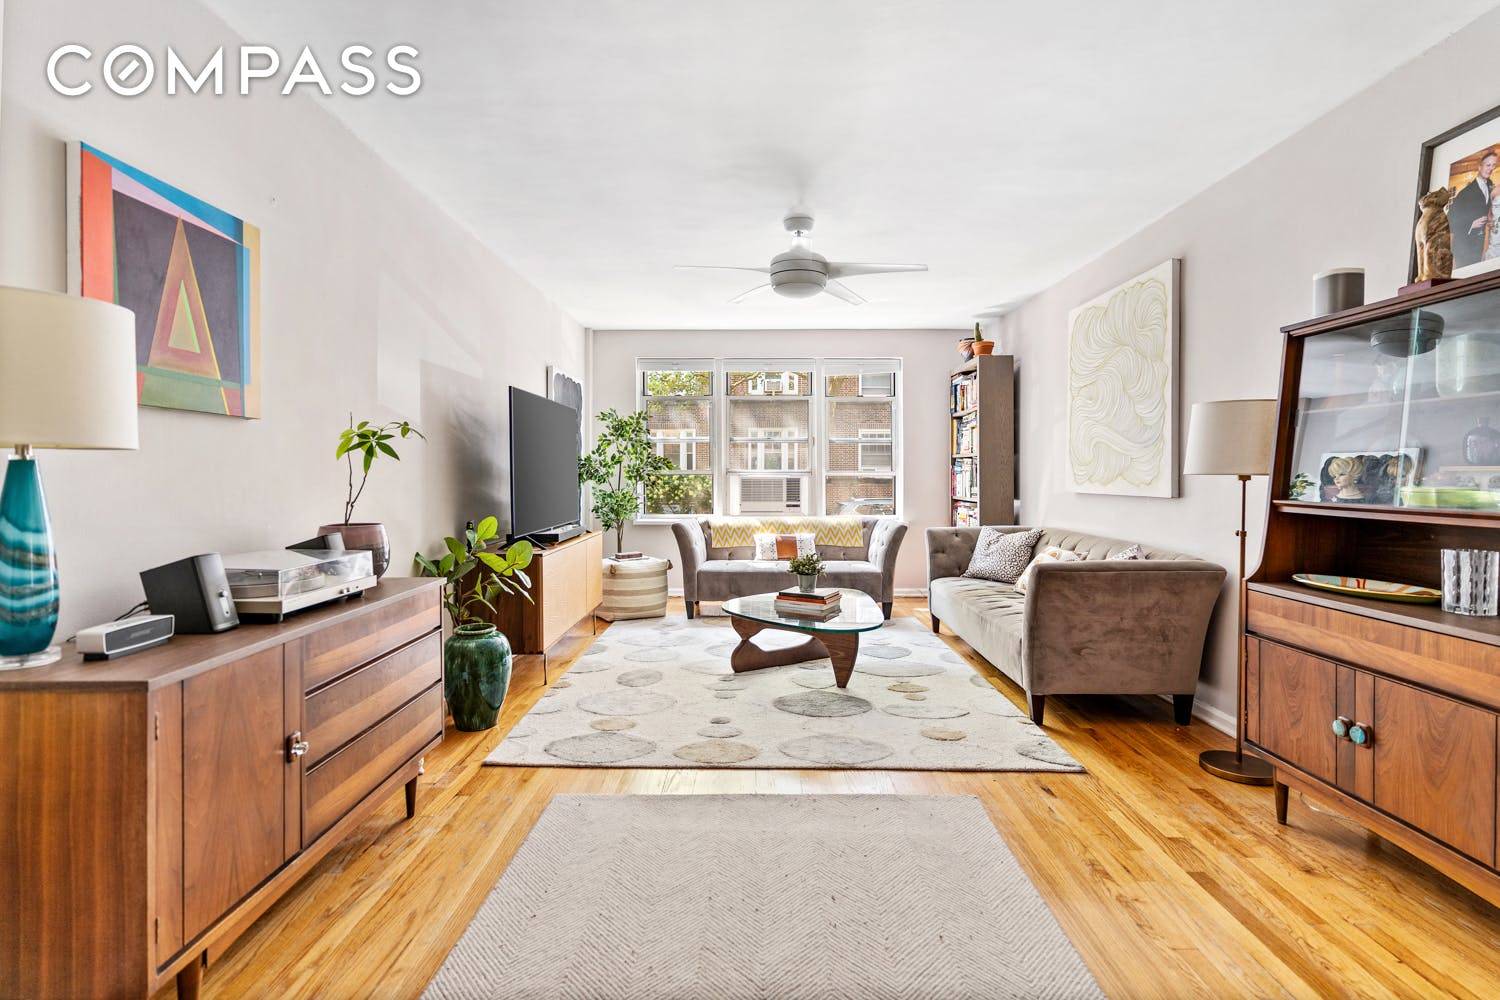 Old world charm meets updated interiors in this beautifully renovated two bedroom, one bathroom featuring designer finishes and partial garden views at The Monroe, a stately Jackson Heights cooperative.